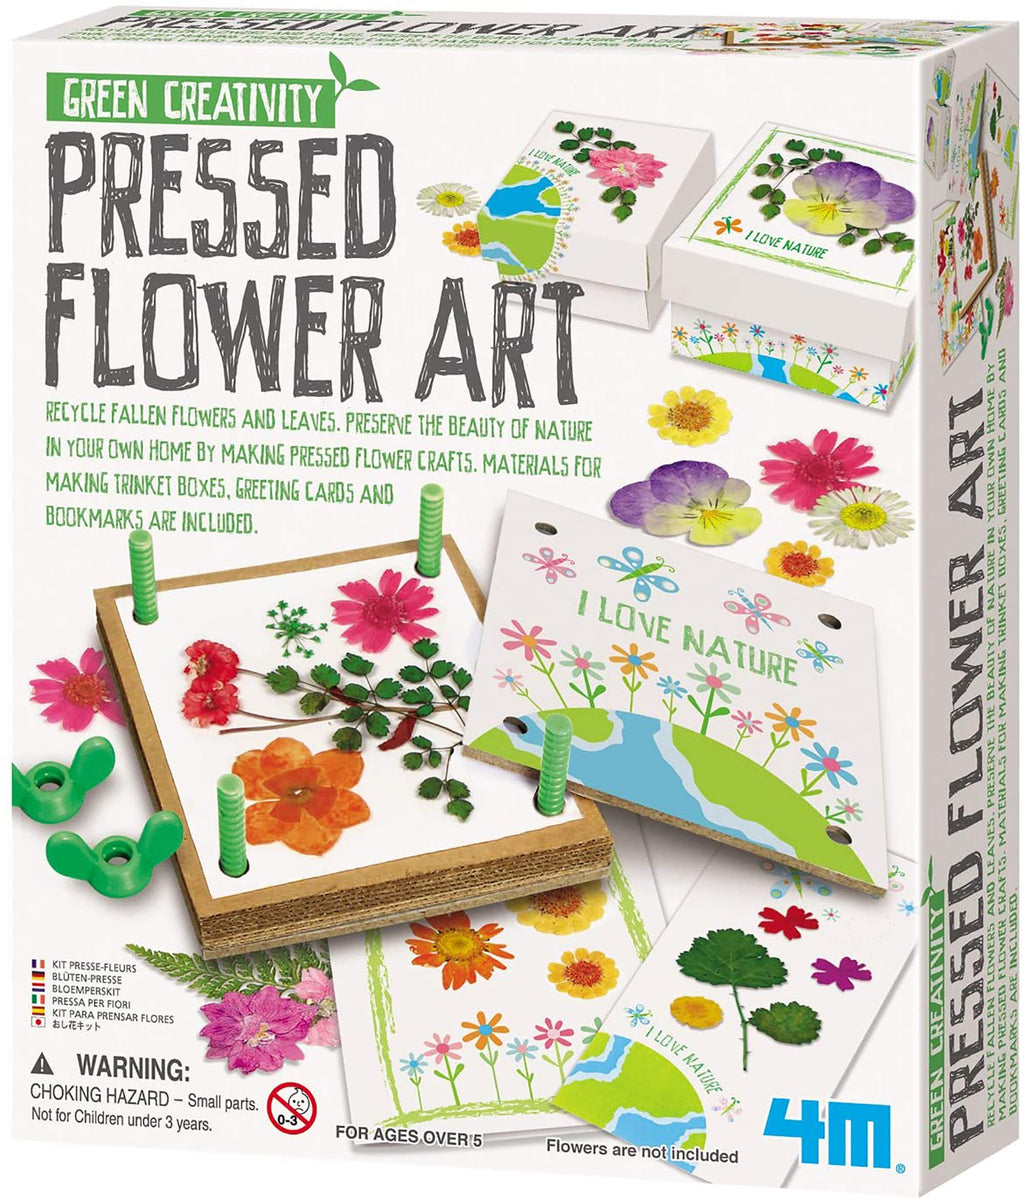 TRAVEL ART KIT FOR KIDS!  PERFECT FOR TRIPS, HOMESCHOOLING & CREATIVE PLAY  